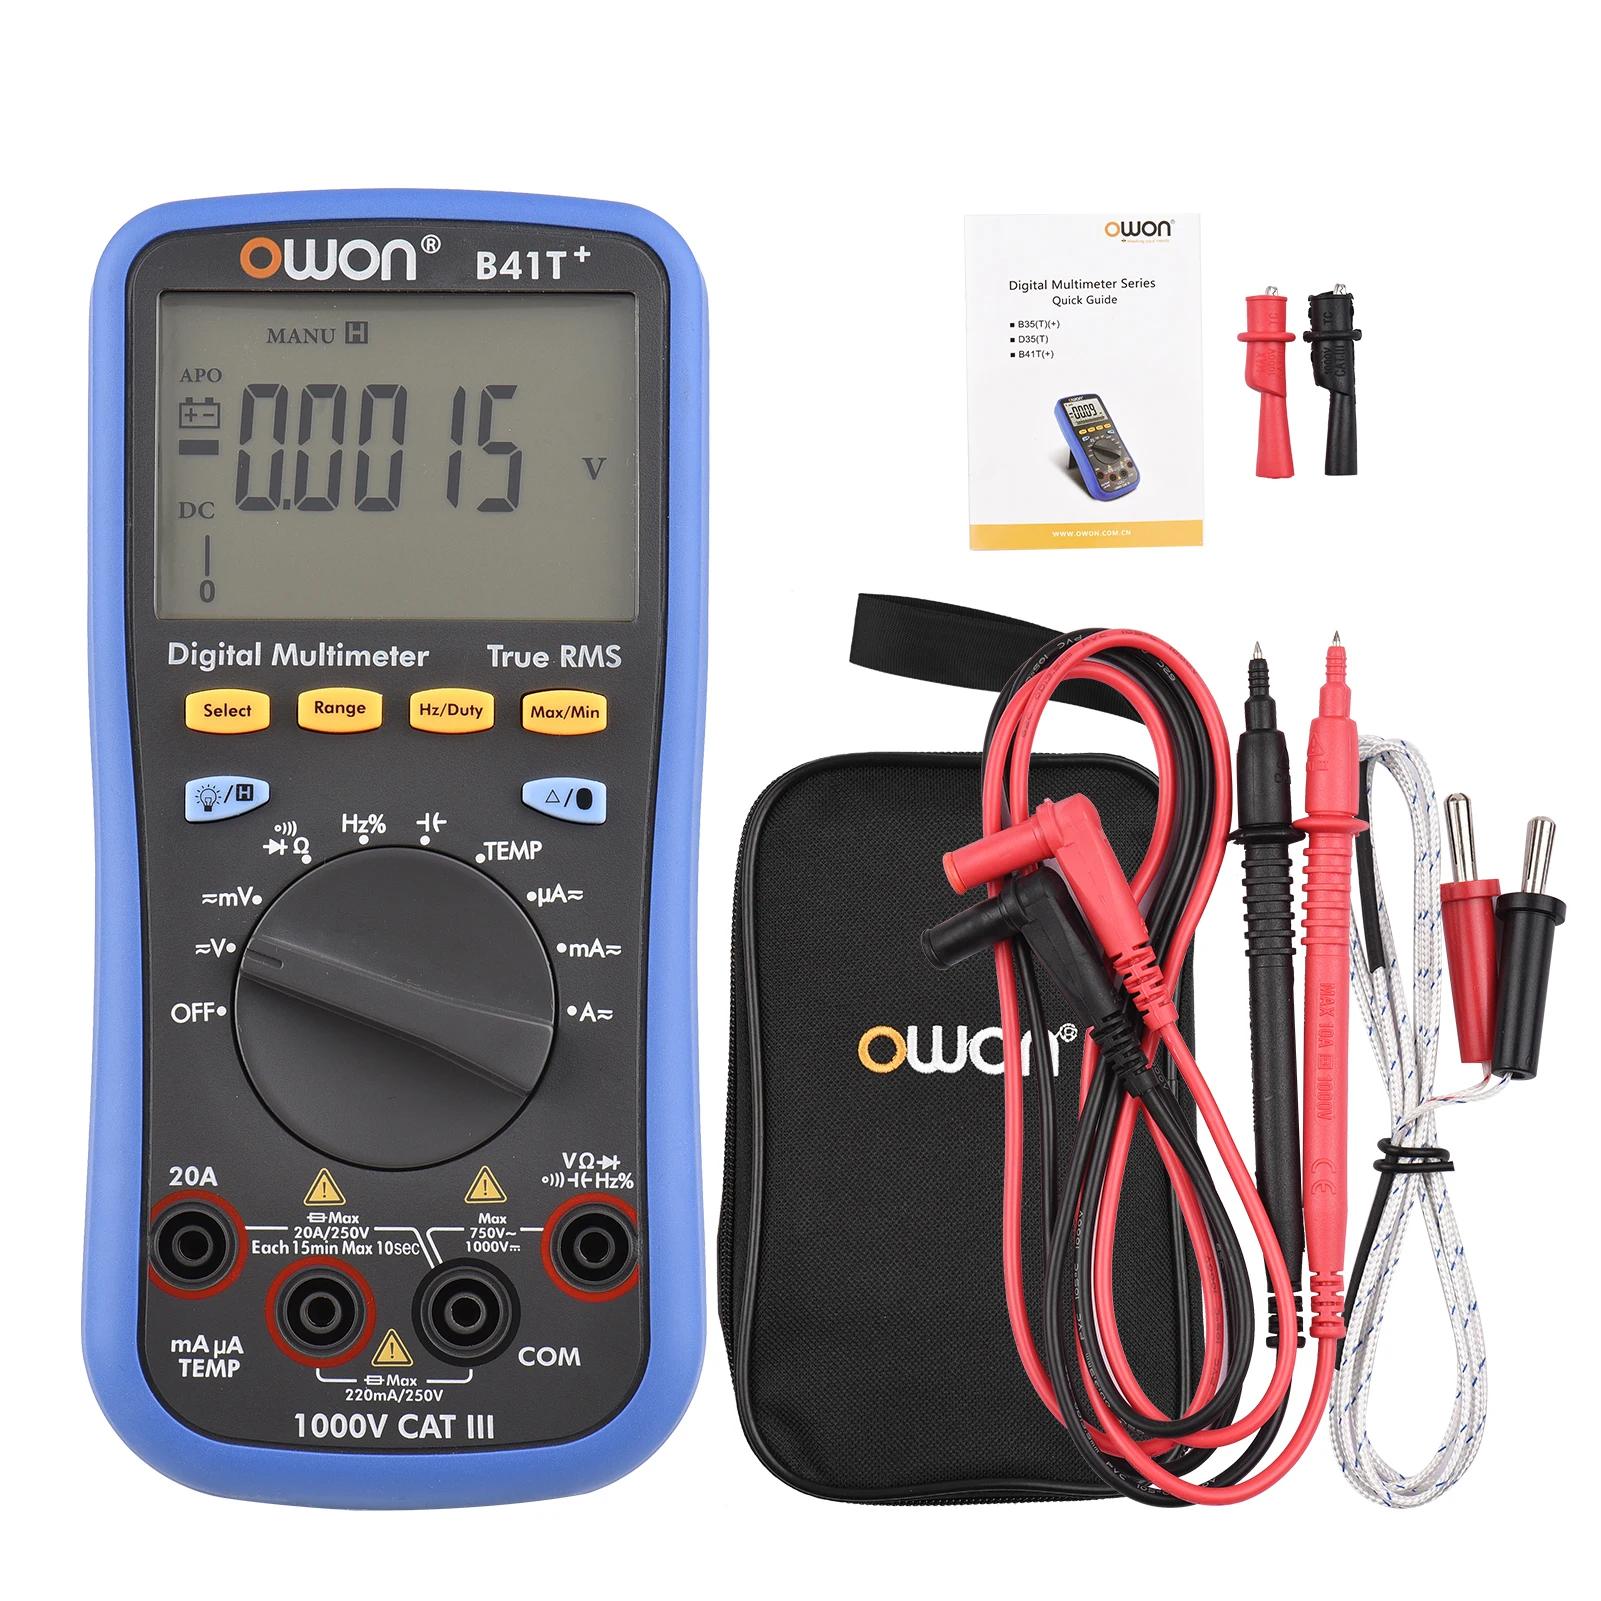 

OWON B41T+ Digital Backlight LCD Screen BT Multimeter with Offline Record 22000 Counts True RMS Auto-ranging Electrical Tester